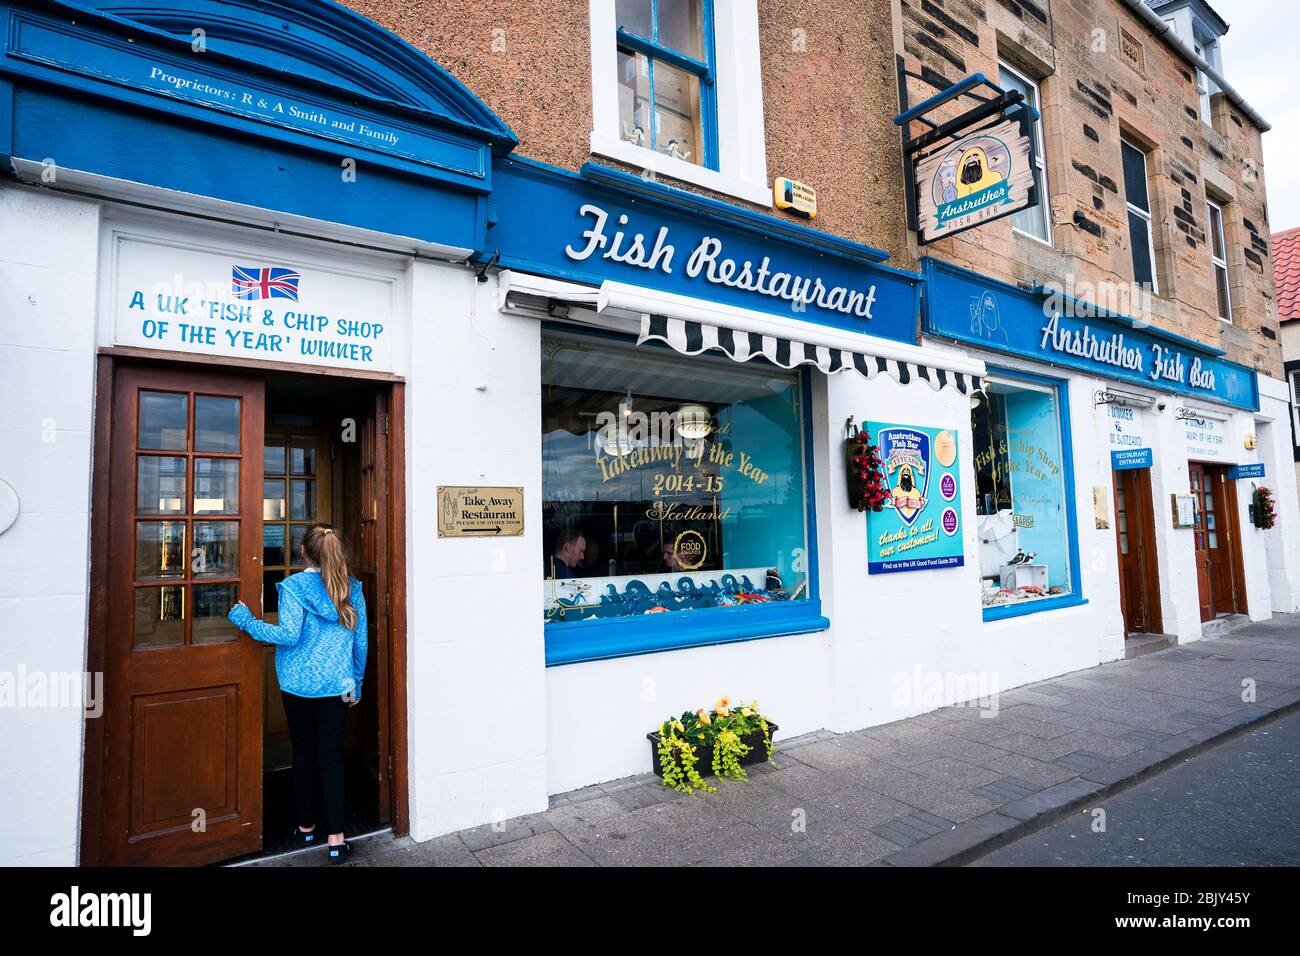 Female tourist enters the famous Anstruther Fish Restaurant, Fishing village, Anstruther, Kingdom of Fife, Scotland, Europe Stock Photo